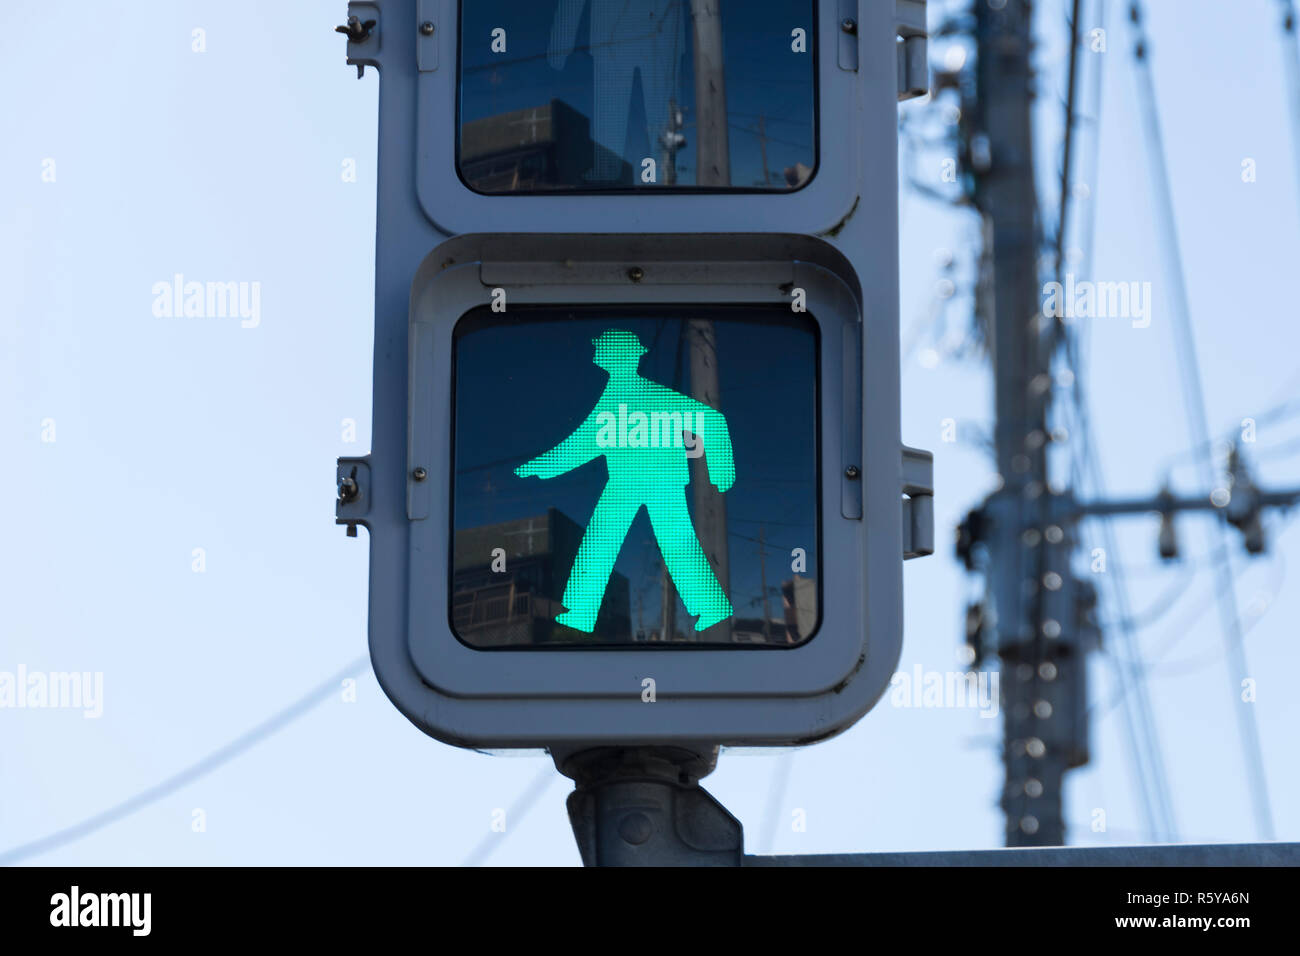 A green traffic light sign that says people can walk or pedestrian walking. This traffic sign was taken in Japan. Stock Photo